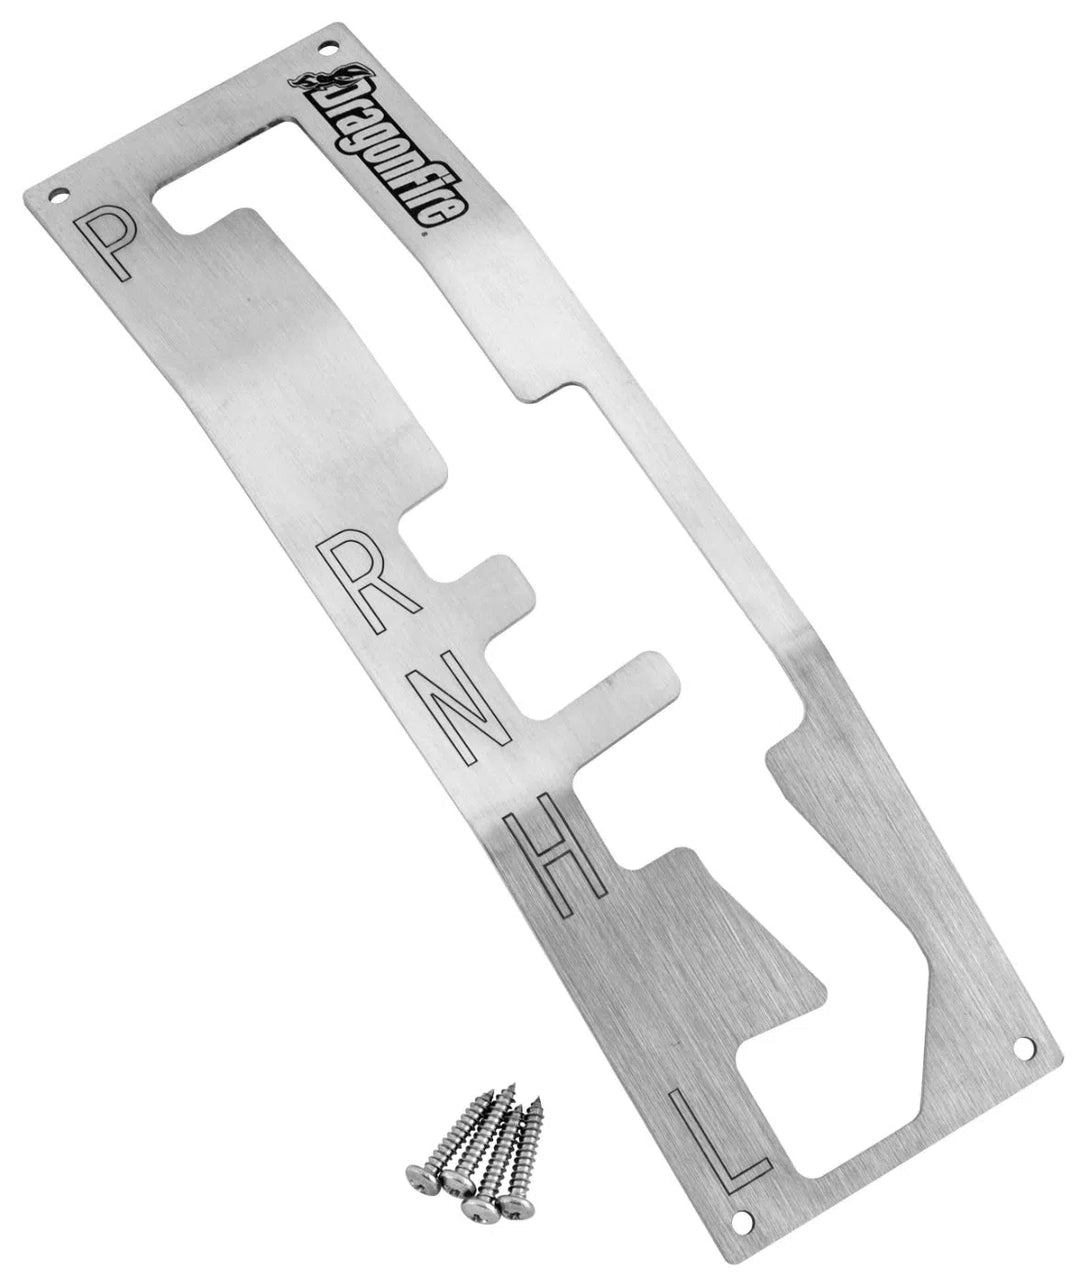 DragonFire Racing Shifter Plate For Maverick X3 - Silver/Stainless - 04-0048